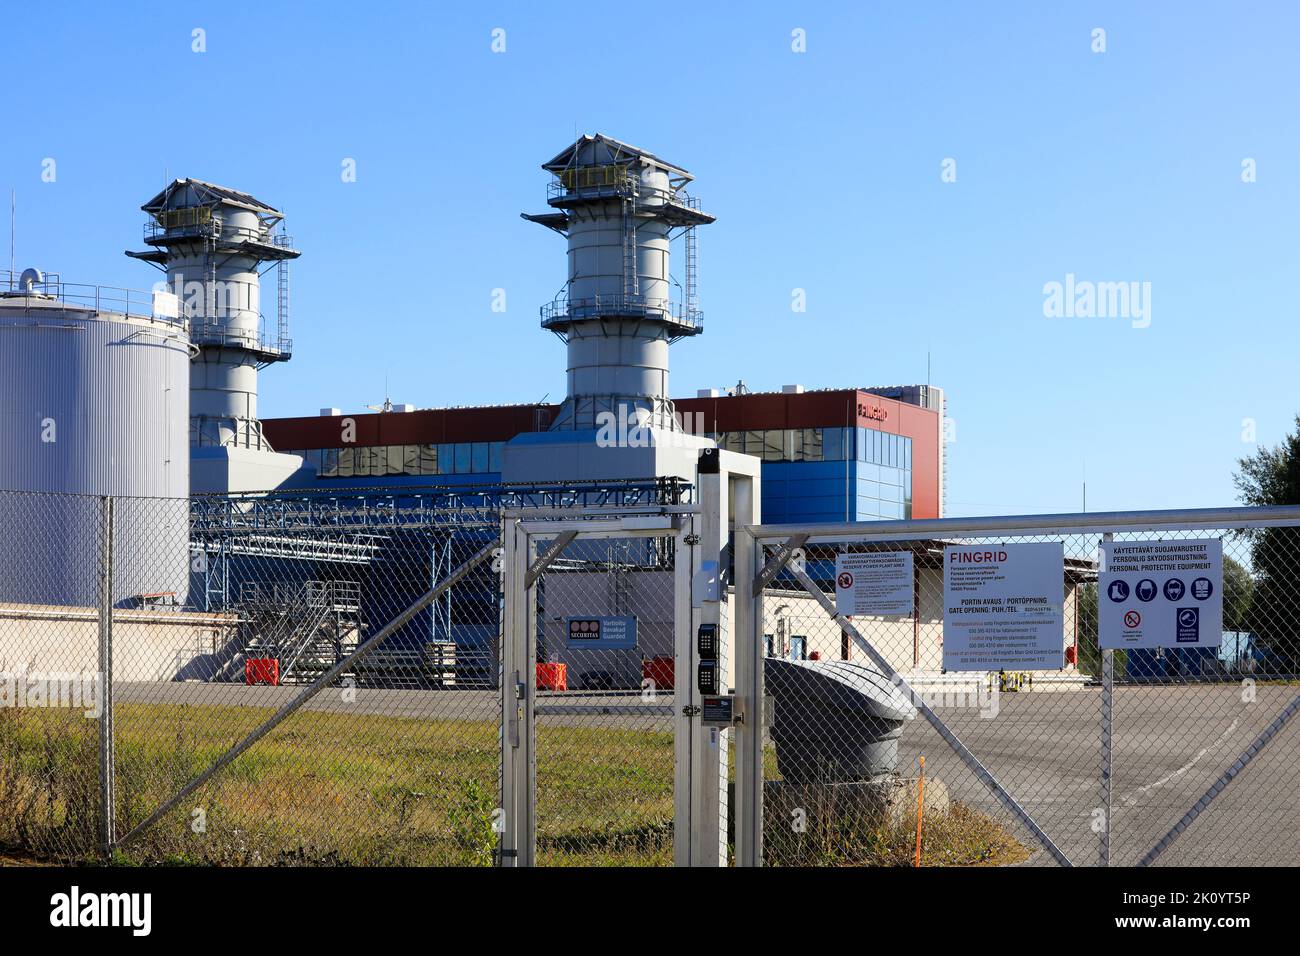 Fingrid Oyj Reserve Power Plant with two gas turbines in Forssa, Finland. September 9, 2022. Stock Photo